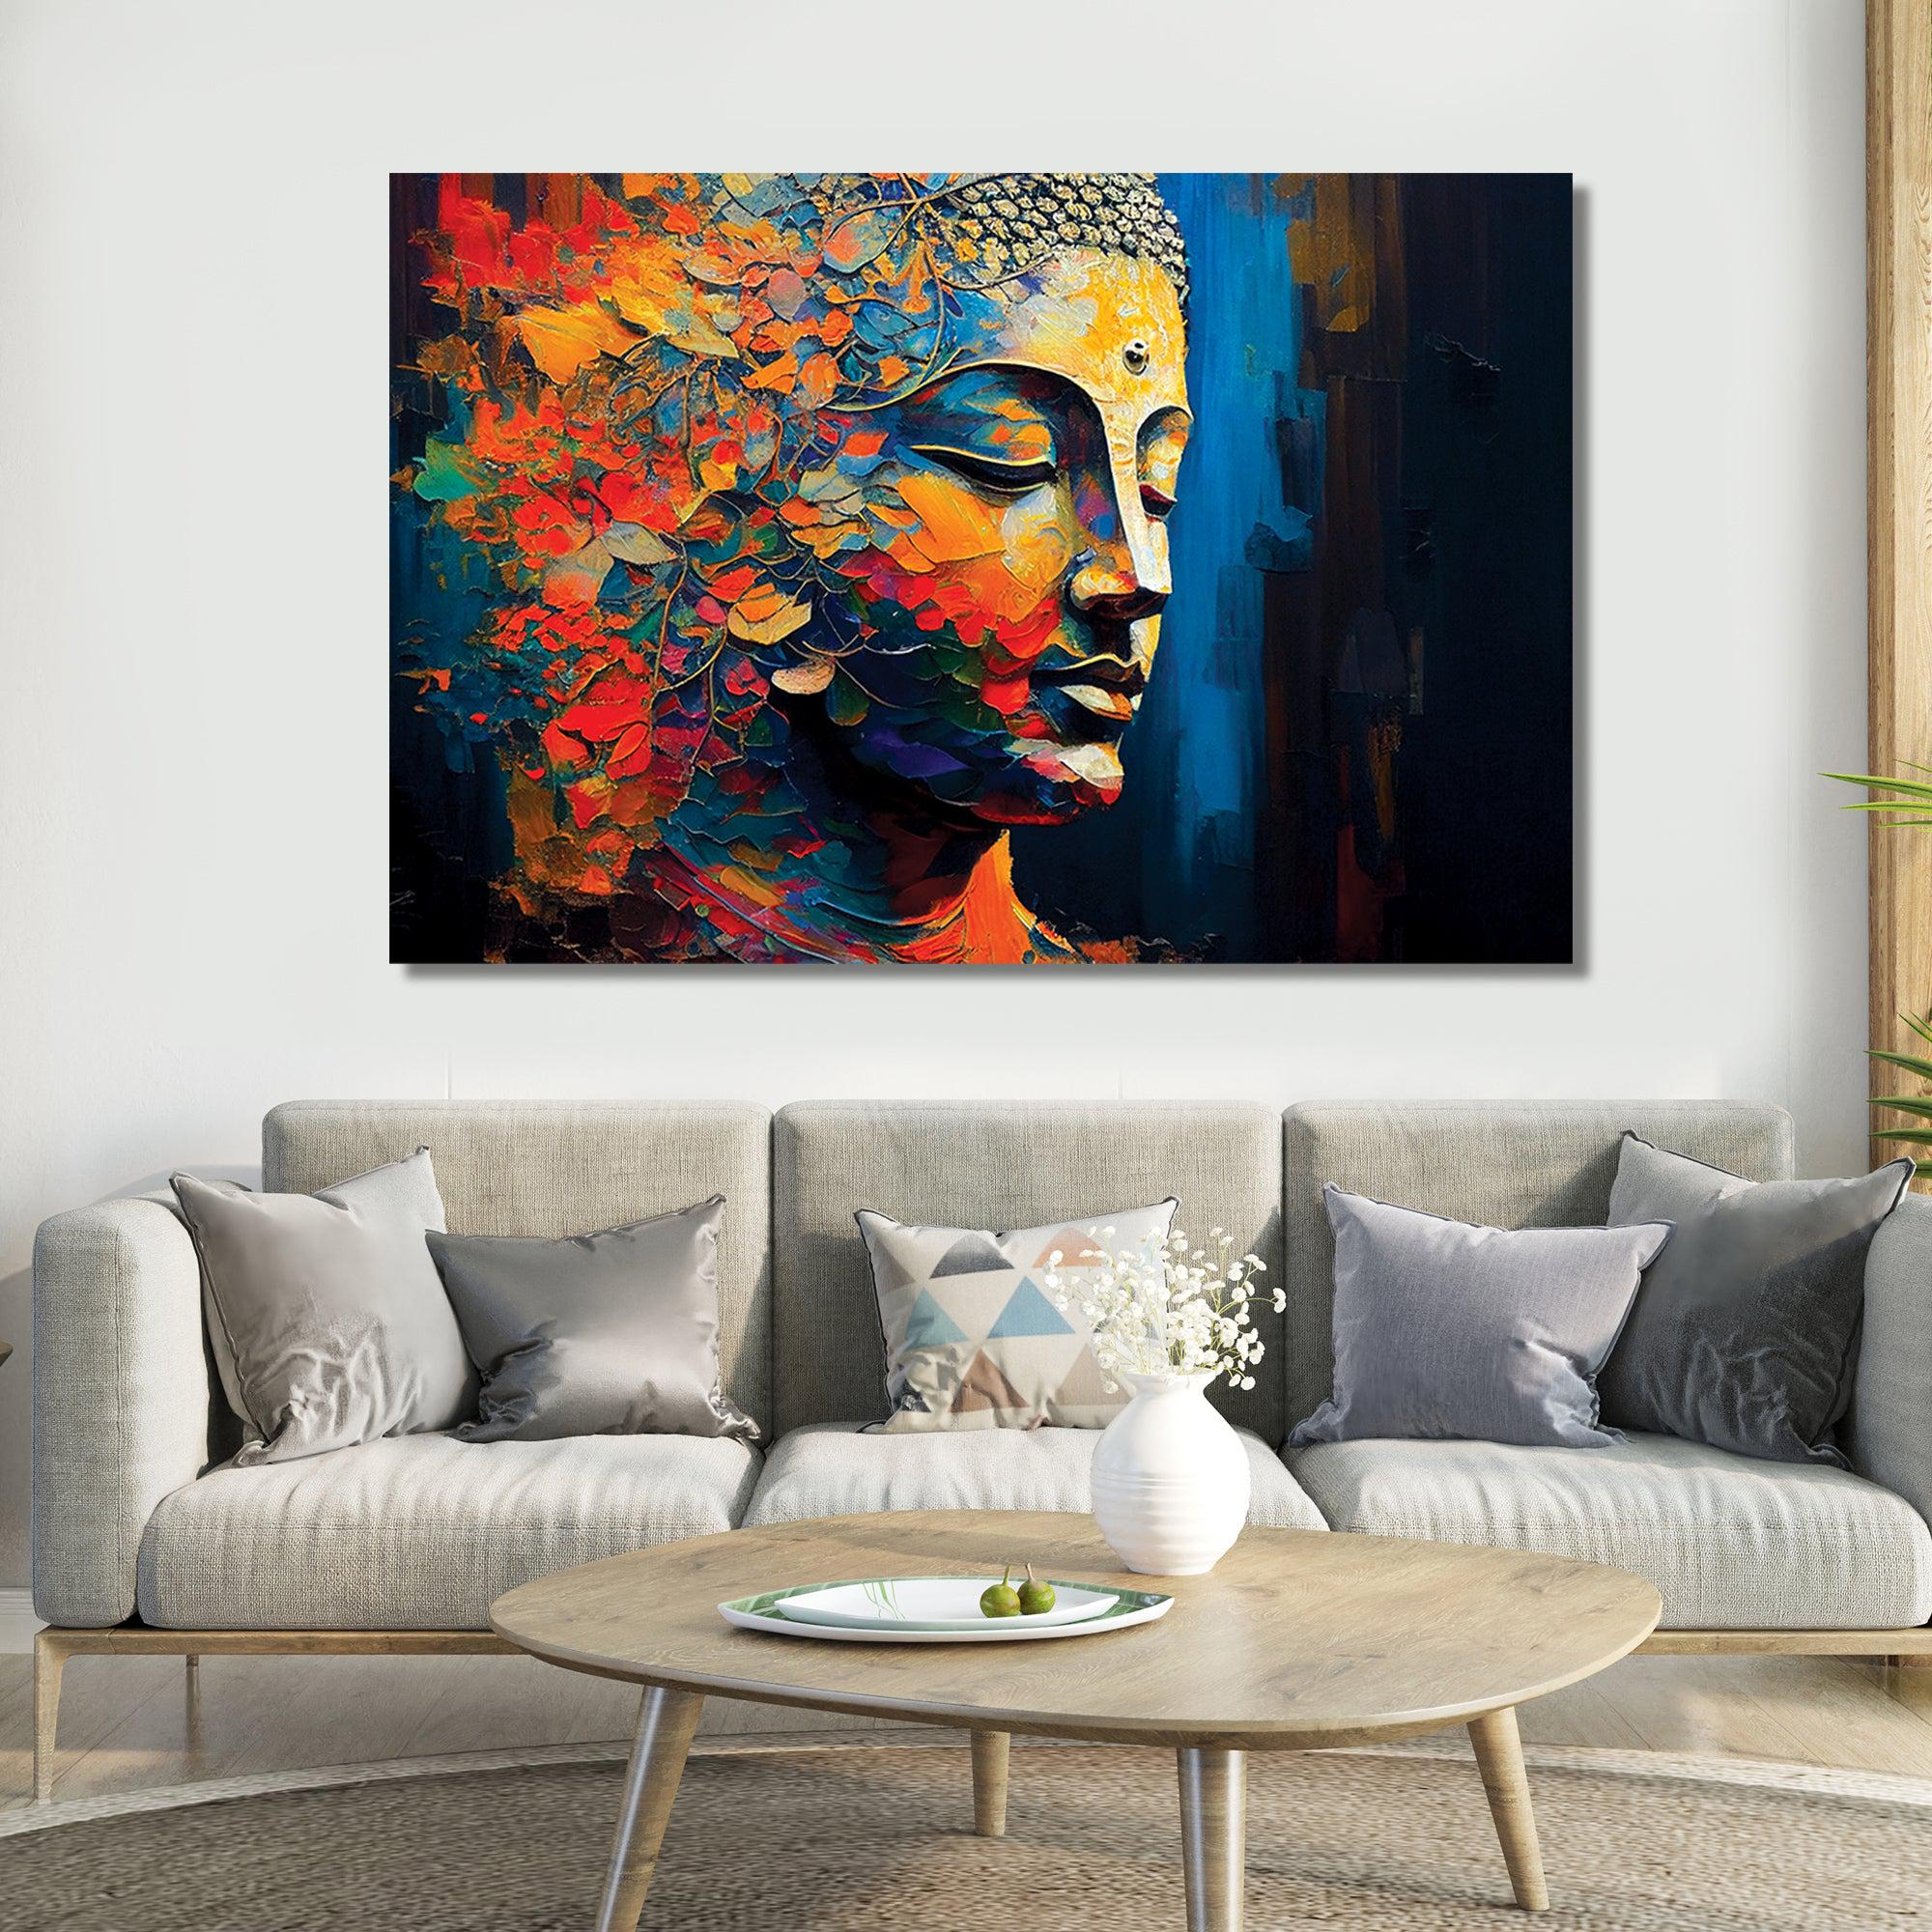 Buy EJA Art Sleeping Buddha Wall Sticker Online at Low Prices in India -  Paytmmall.com